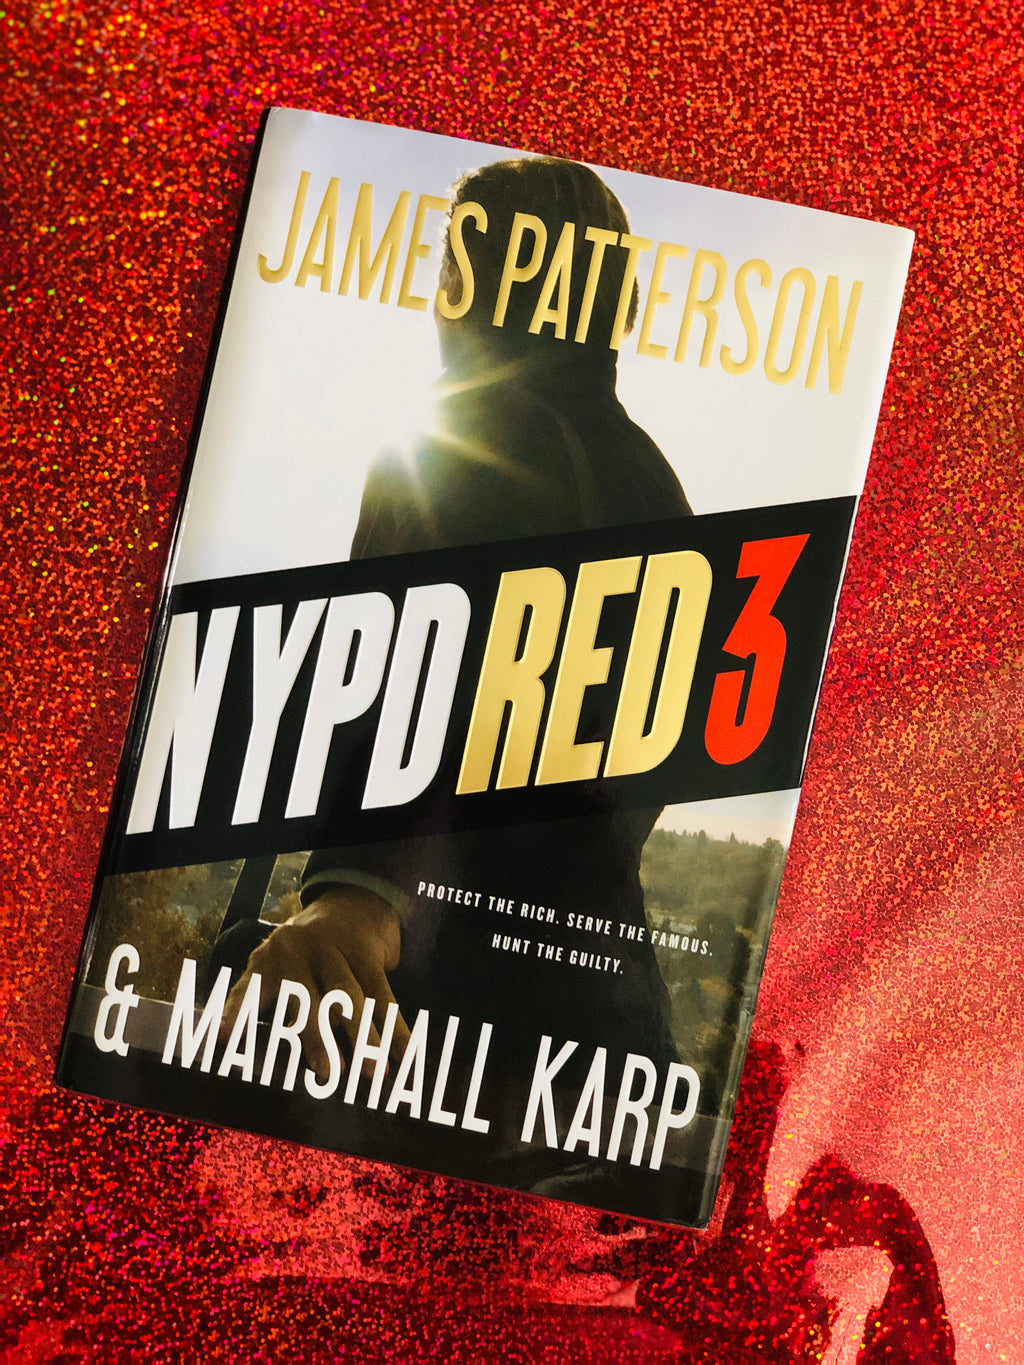 NYPD Red 3- By James Patterson & Marshall Karp